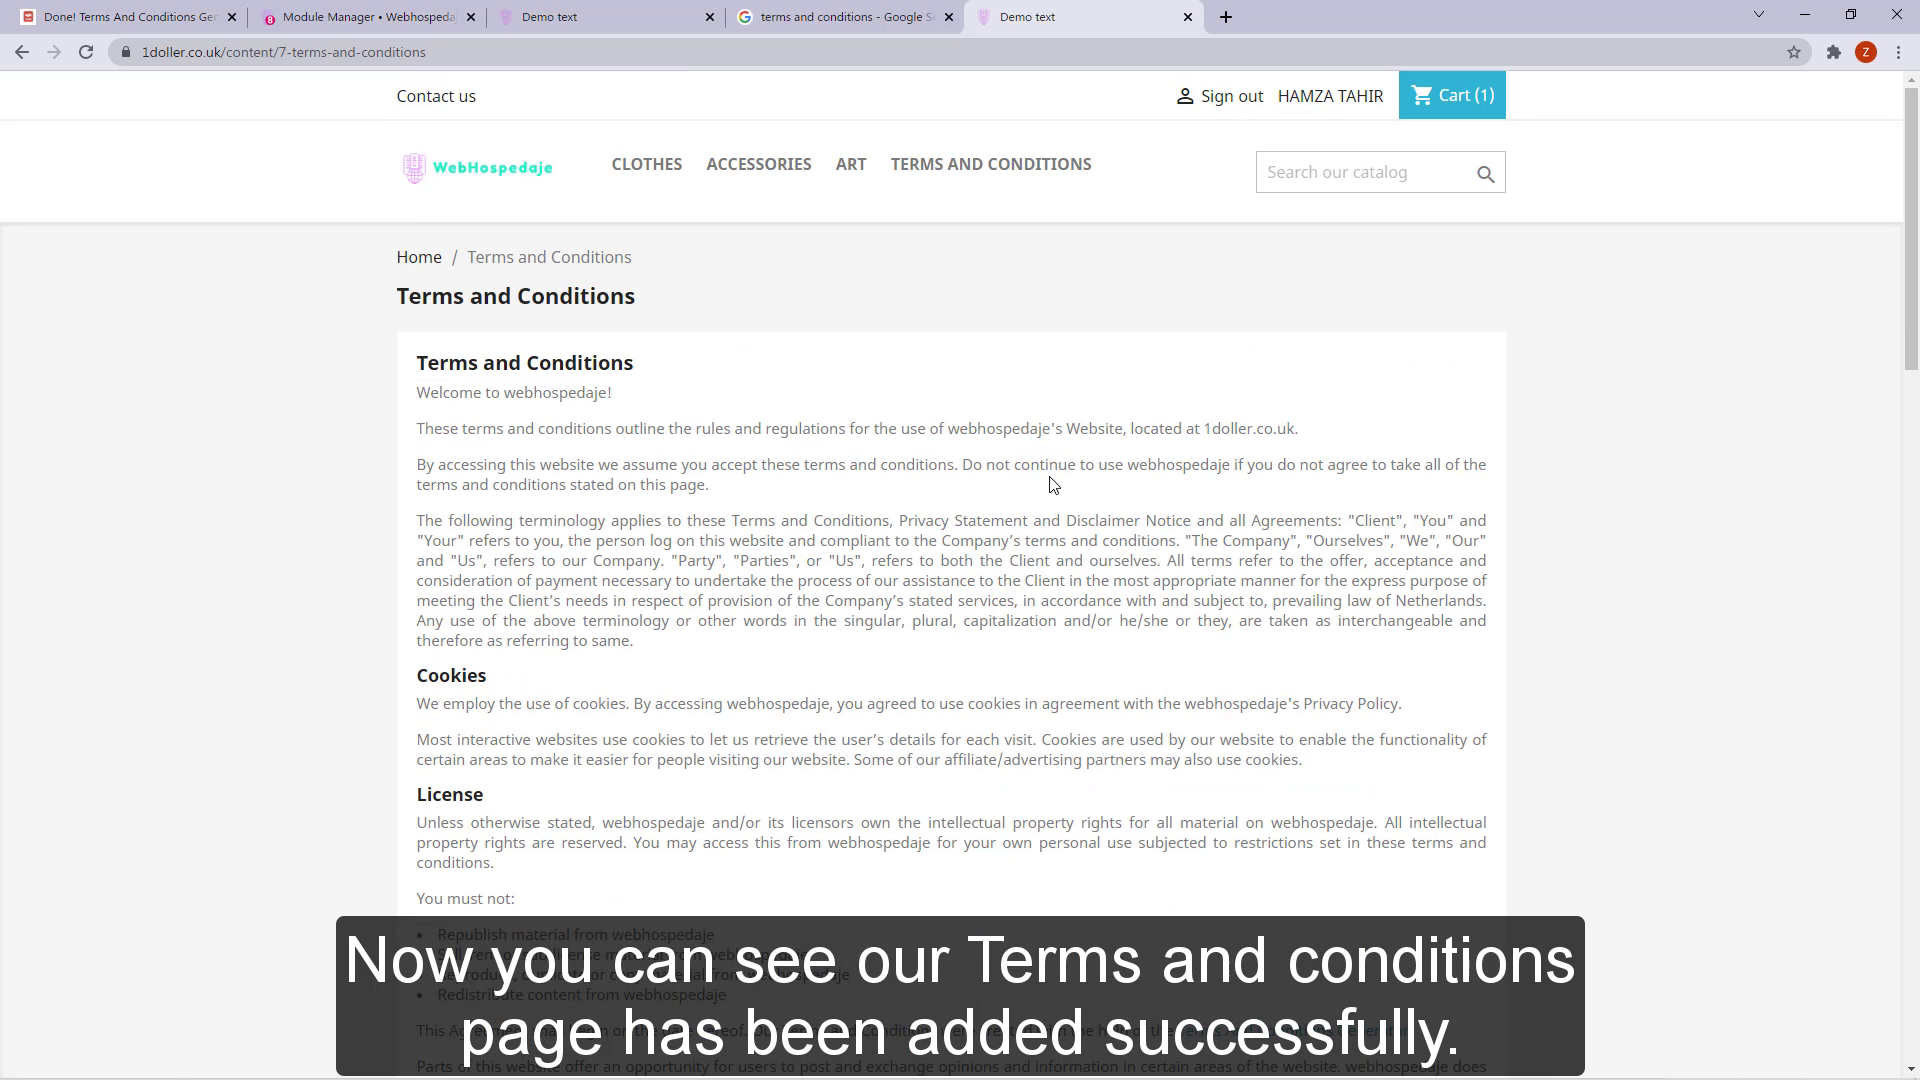 Terms and conditions page has been added successfully